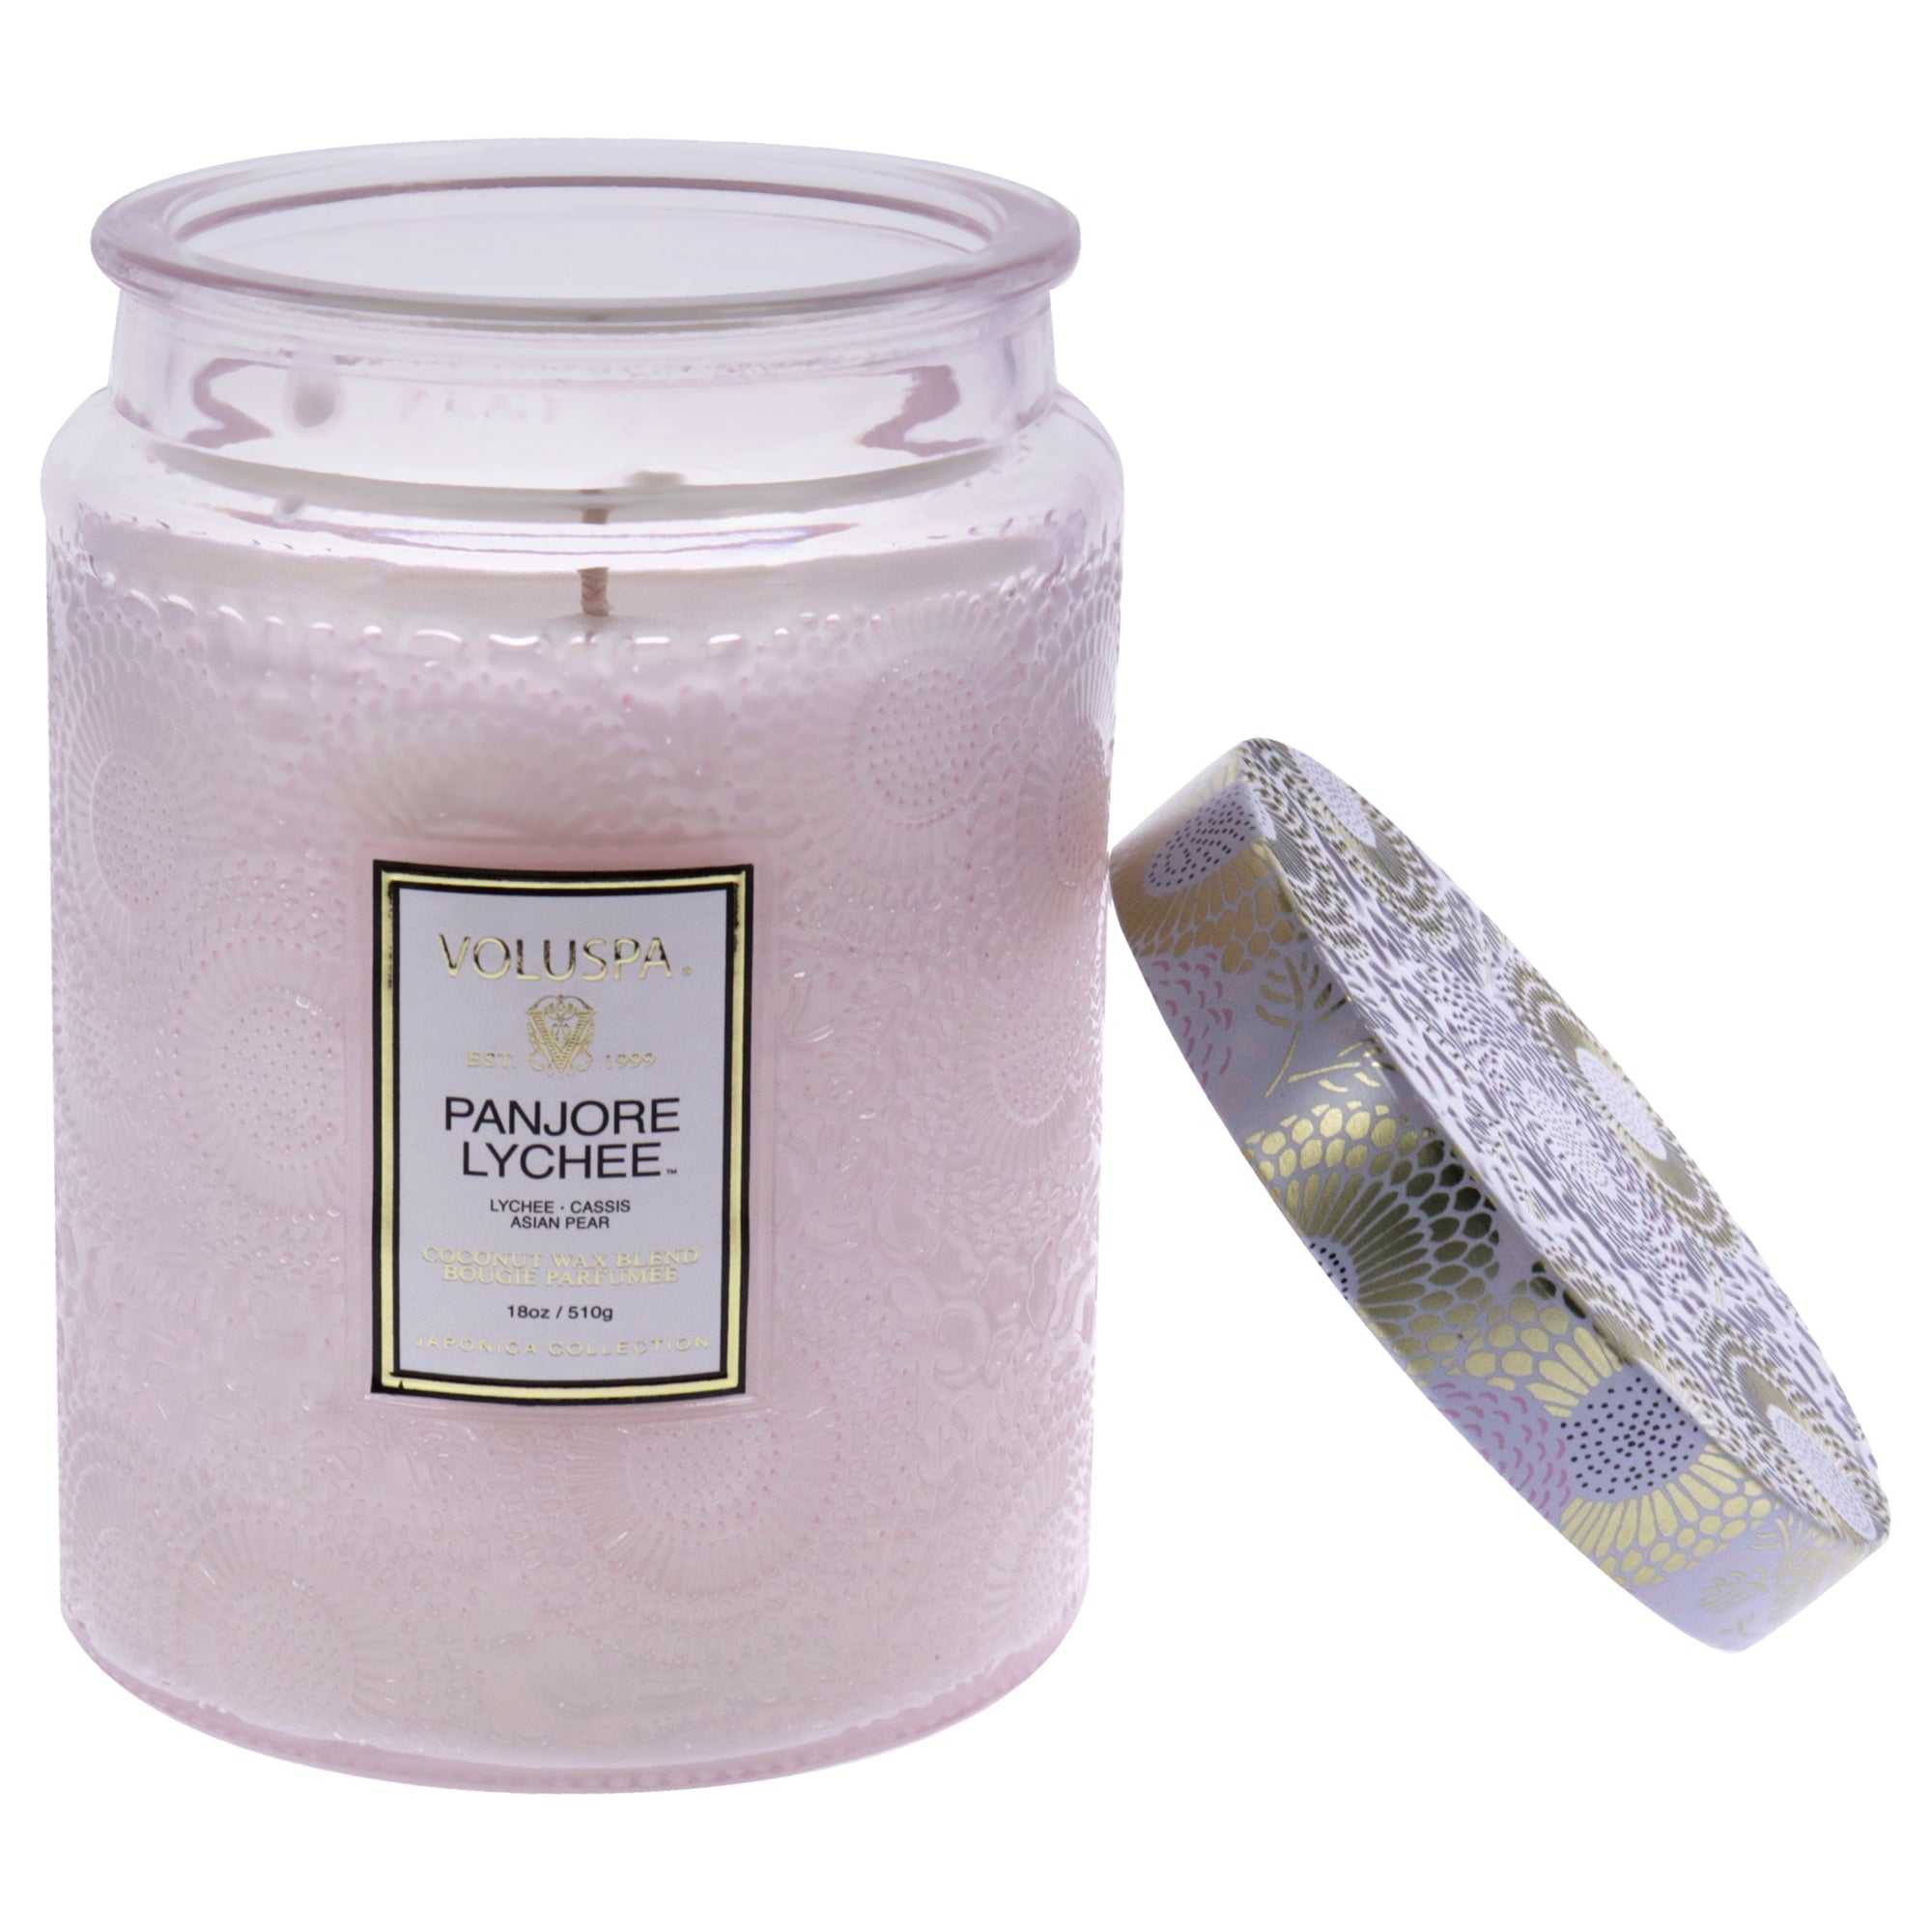 Panjore Lychee - Large by Voluspa for Unisex - 18 oz Candle